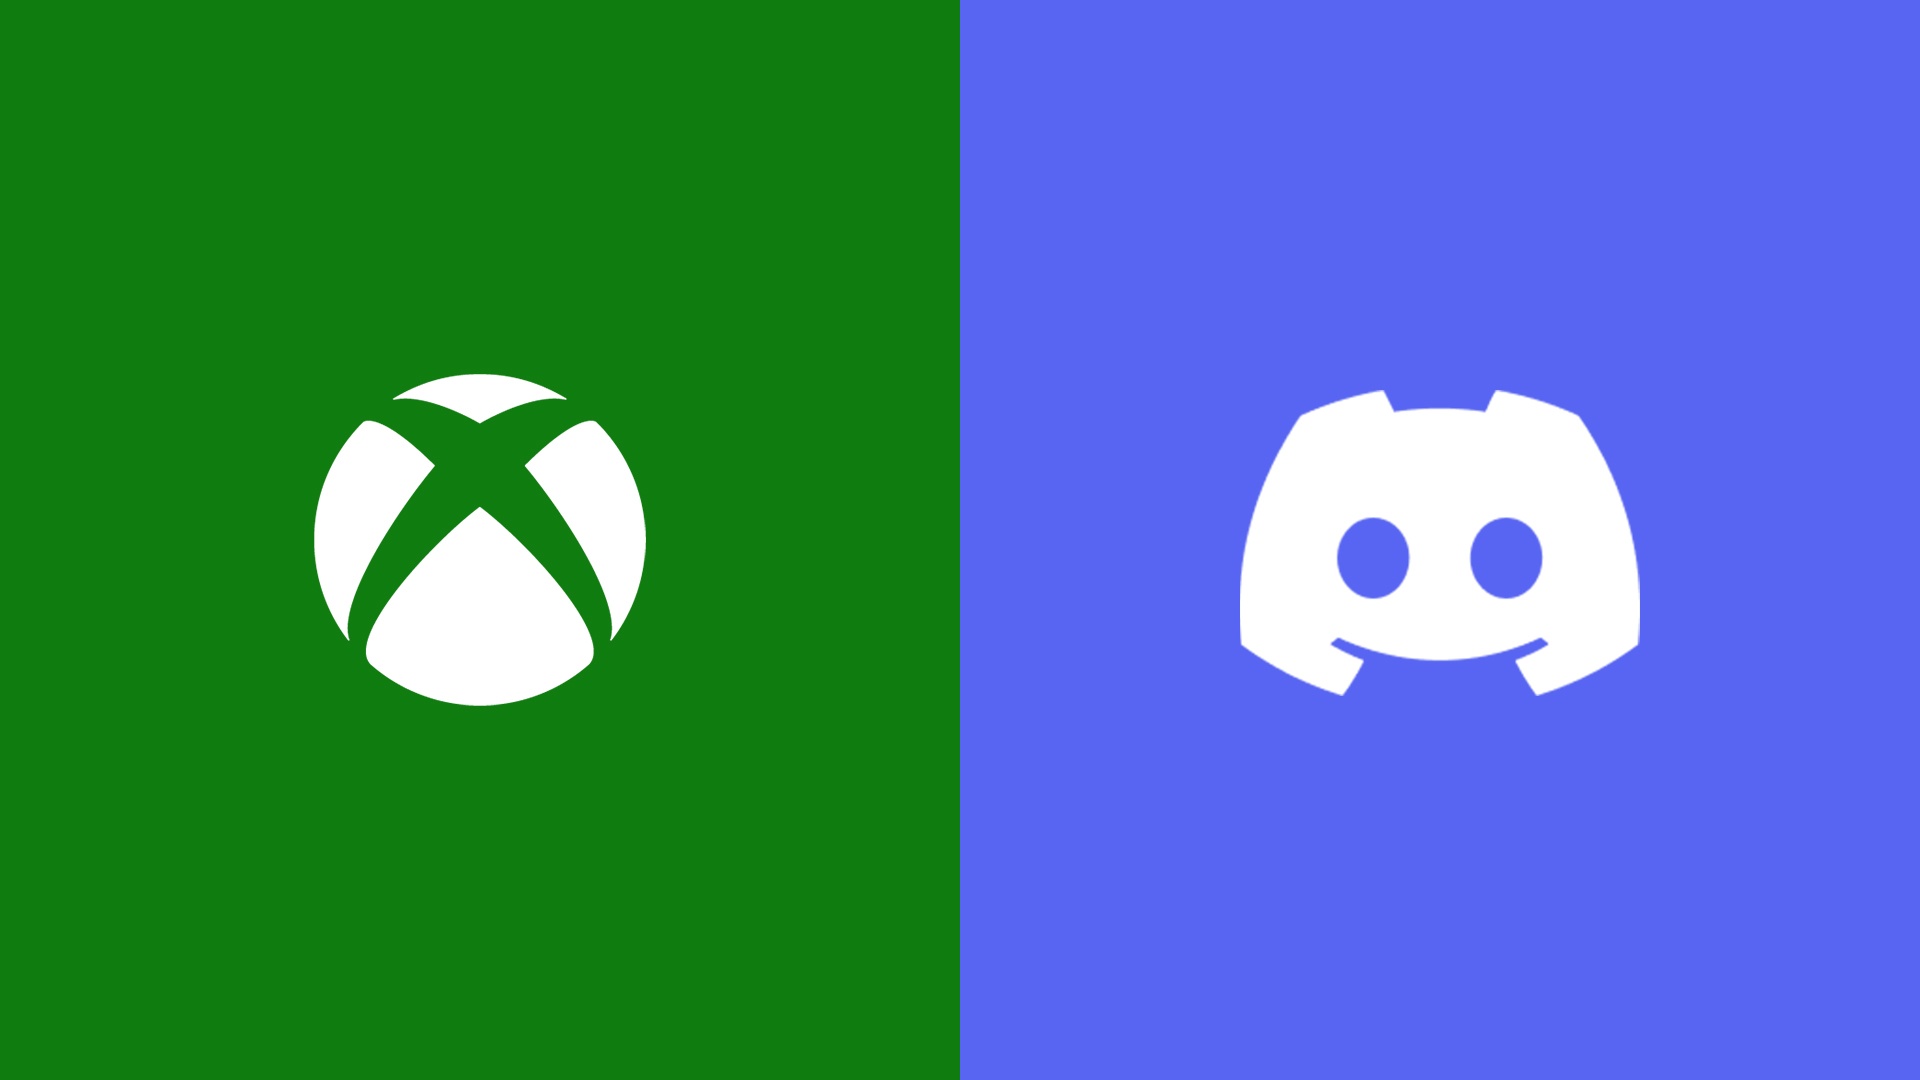 Xbox Now Enabling Gameplay Streaming to Discord Friends